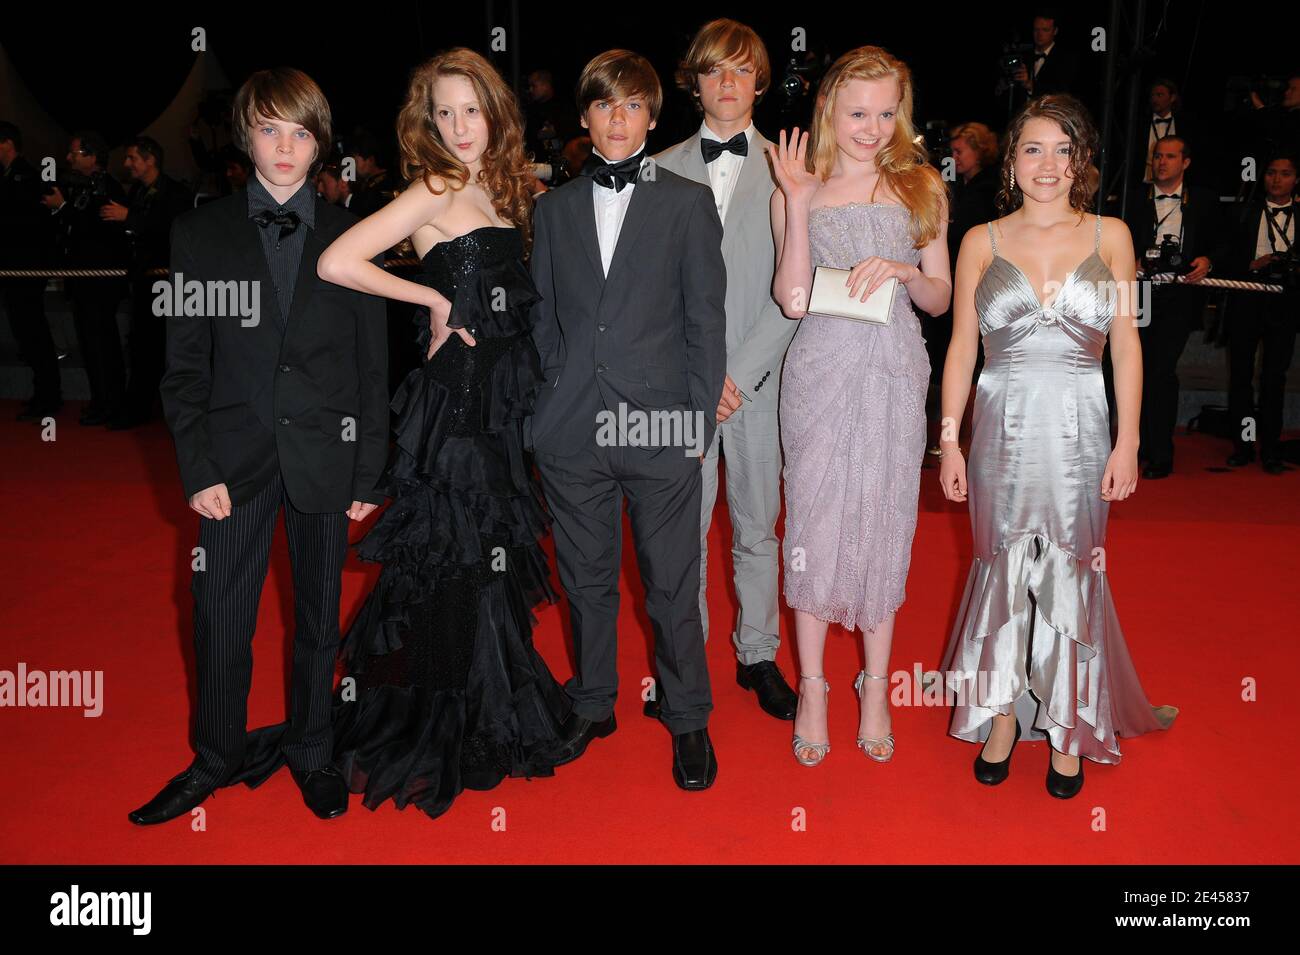 Leonie Benesch, Marie-Victoria Dragus, Janina Fautz, Roxanne Duran, Michal Kranz, Leonard Proxauf and Enno Trebbs arriving for the screening of 'The White Ribbon' during the 62nd Cannes Film Festival at the Palais des Festivals in Cannes, France on May 21, 2009. Photo by Nebinger-Orban/ABACAPRESS.COM Stock Photo